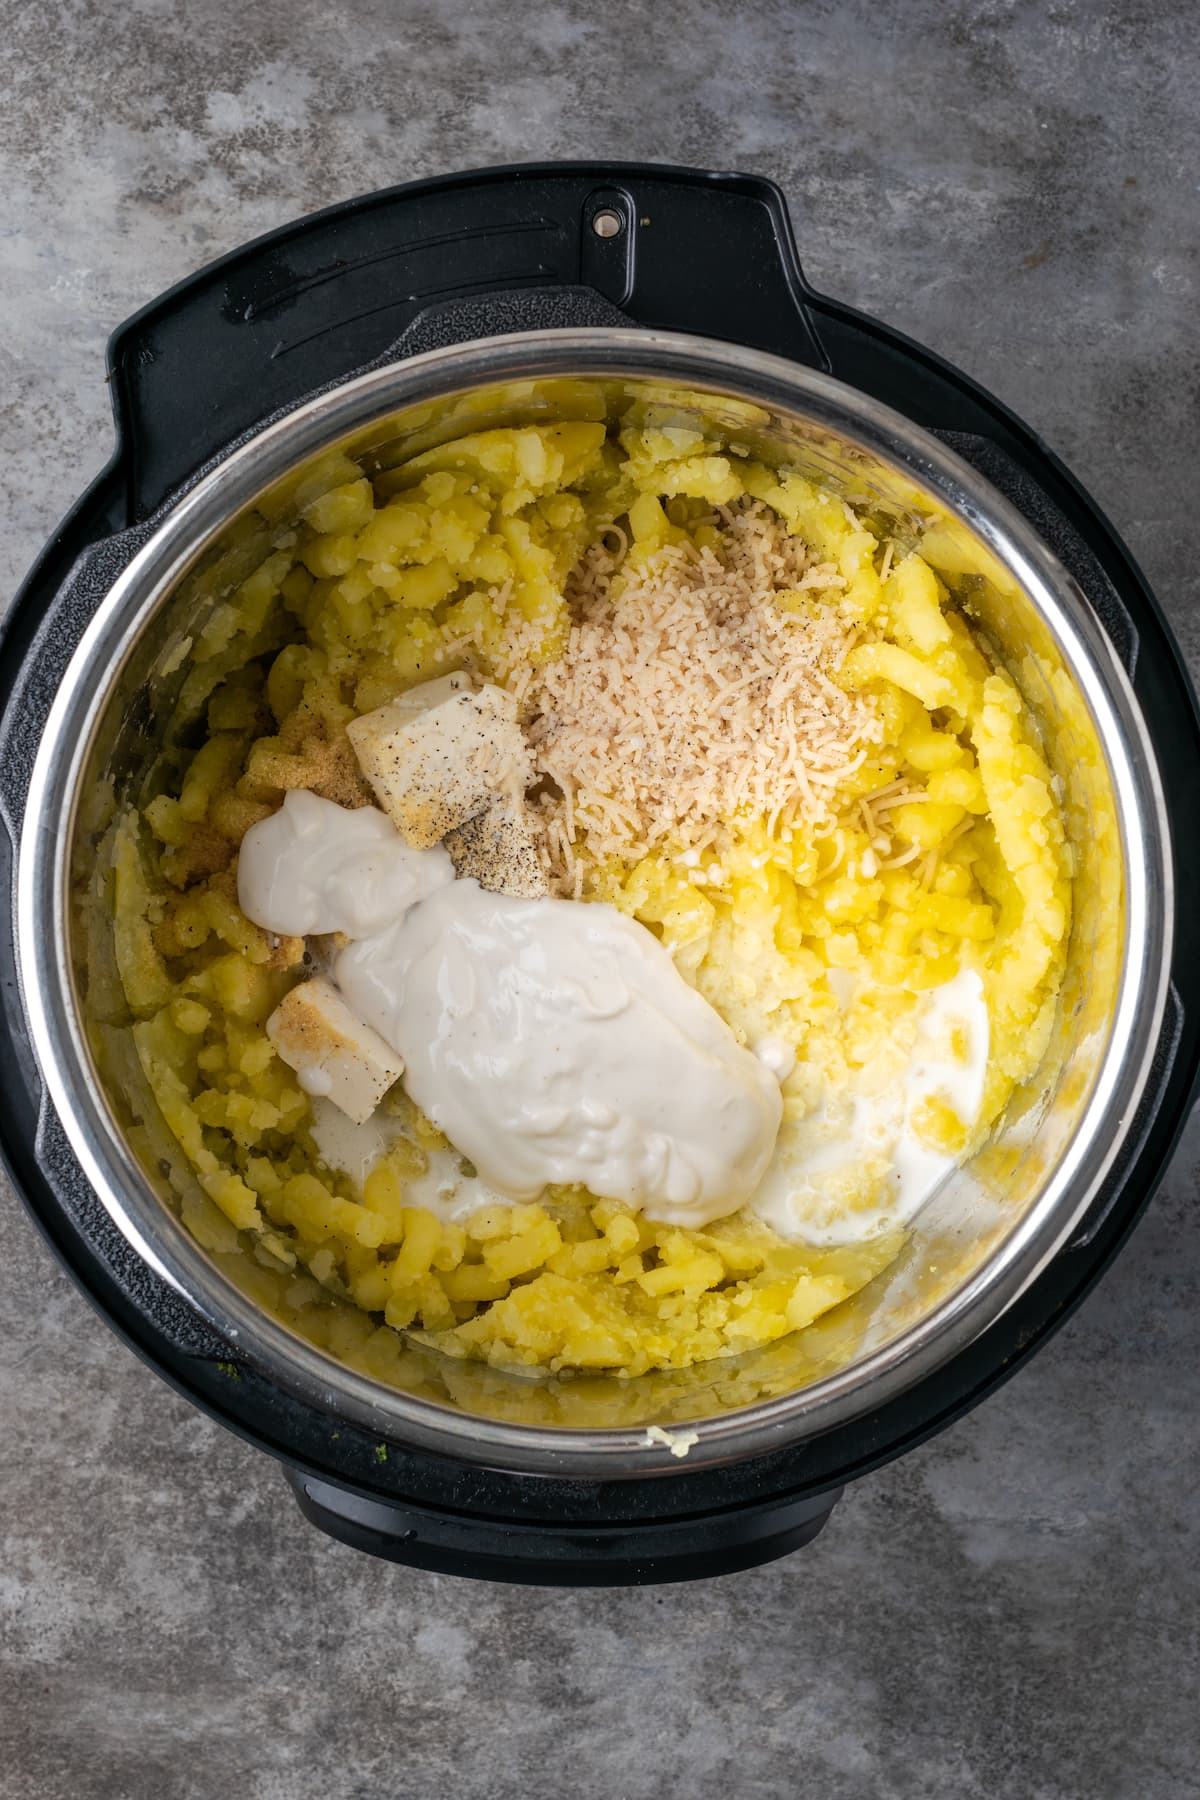 Seasonings, sour cream, and butter added to mashed potatoes inside the Instant Pot.